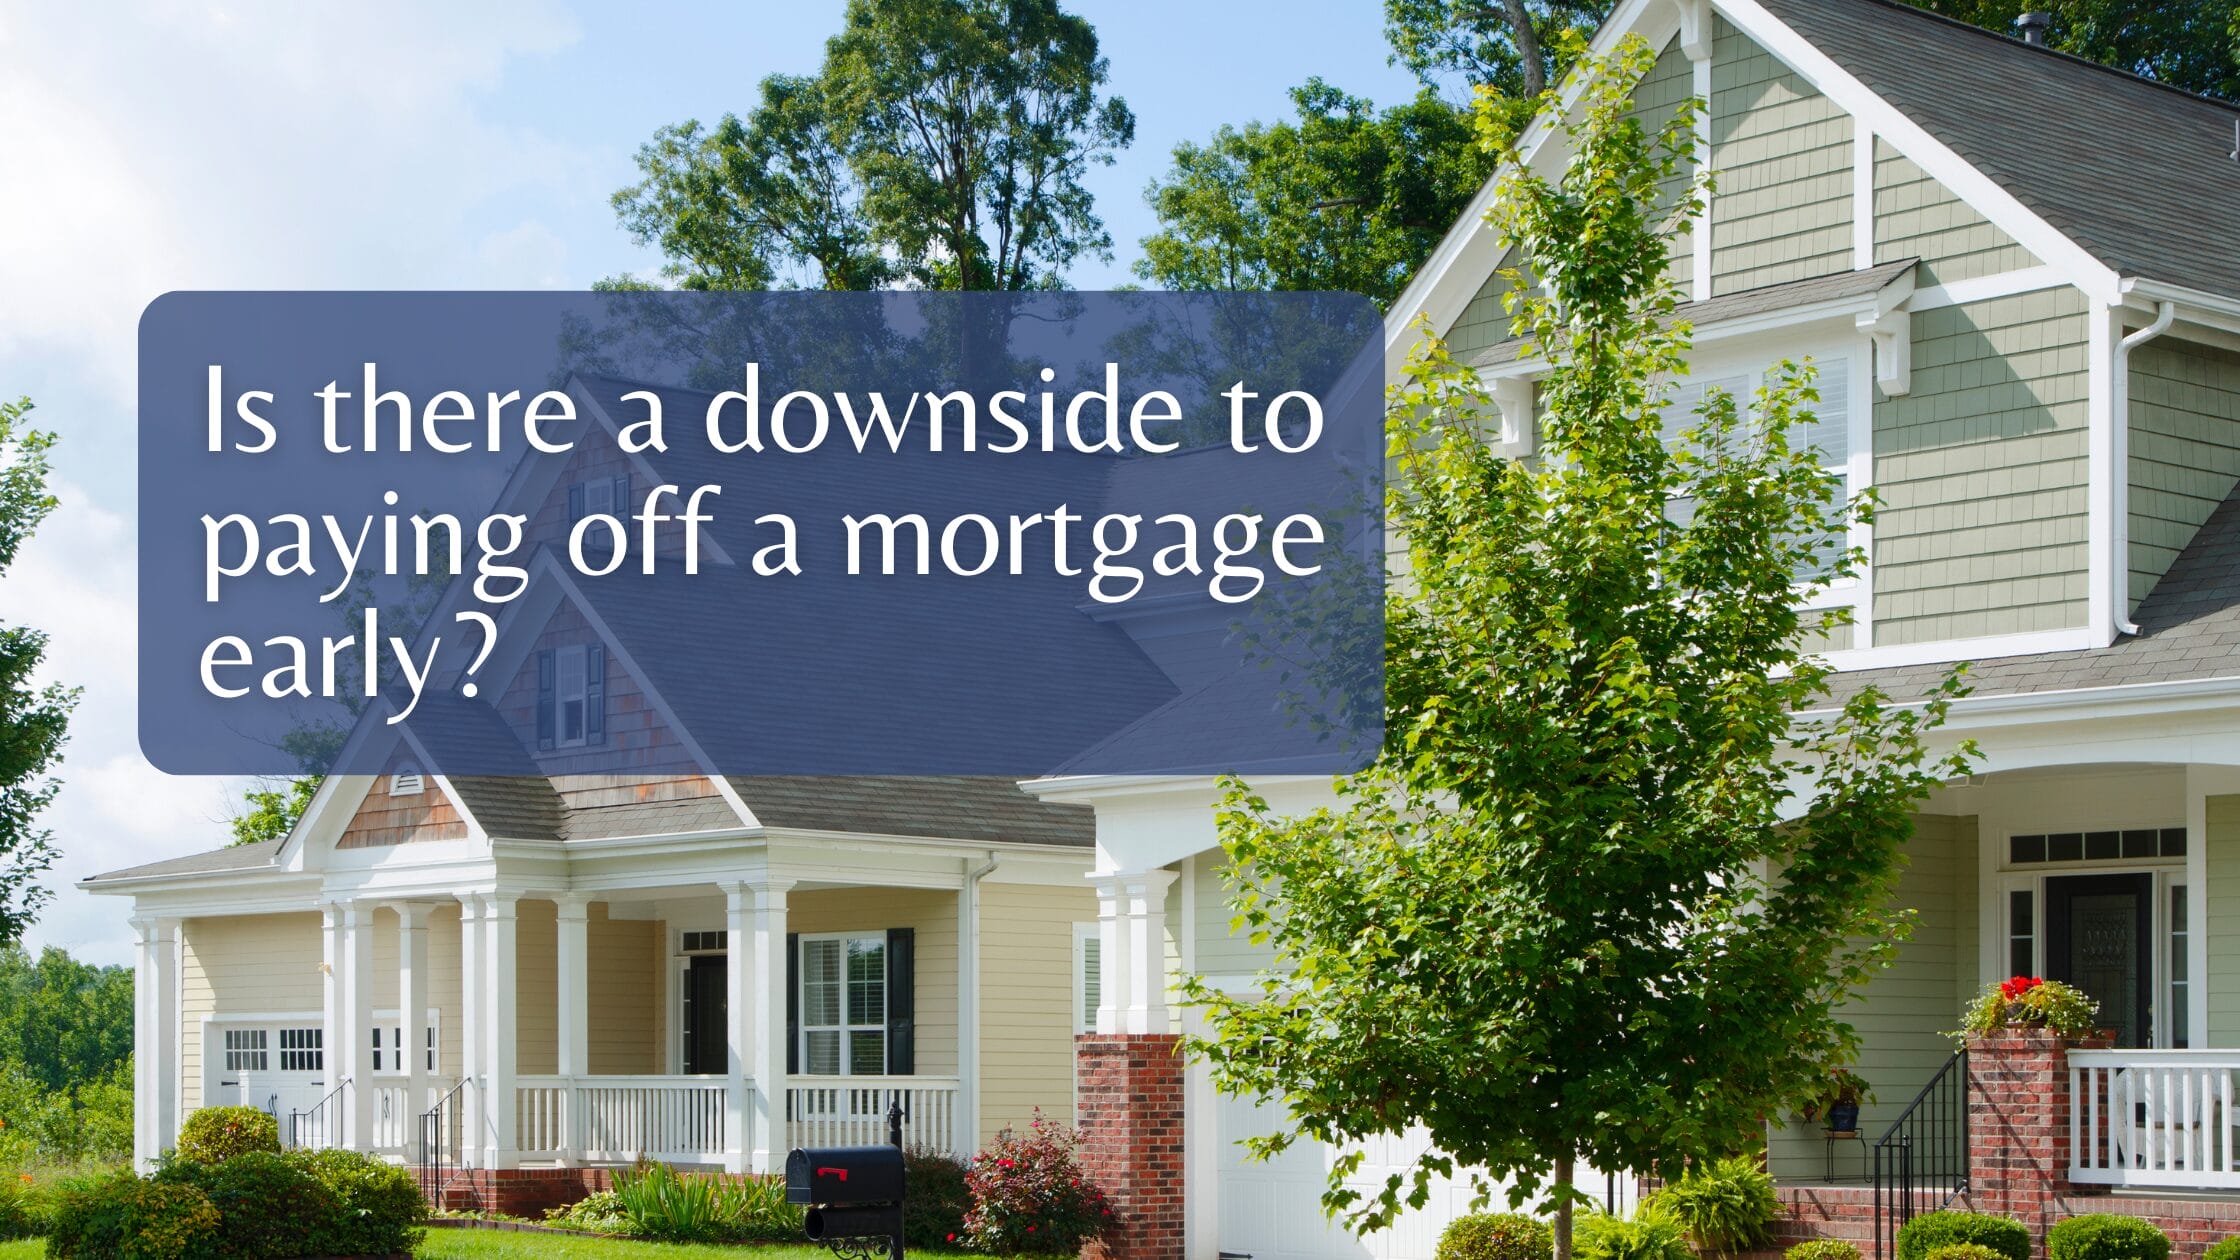 Is there a downside to paying off a mortgage early?